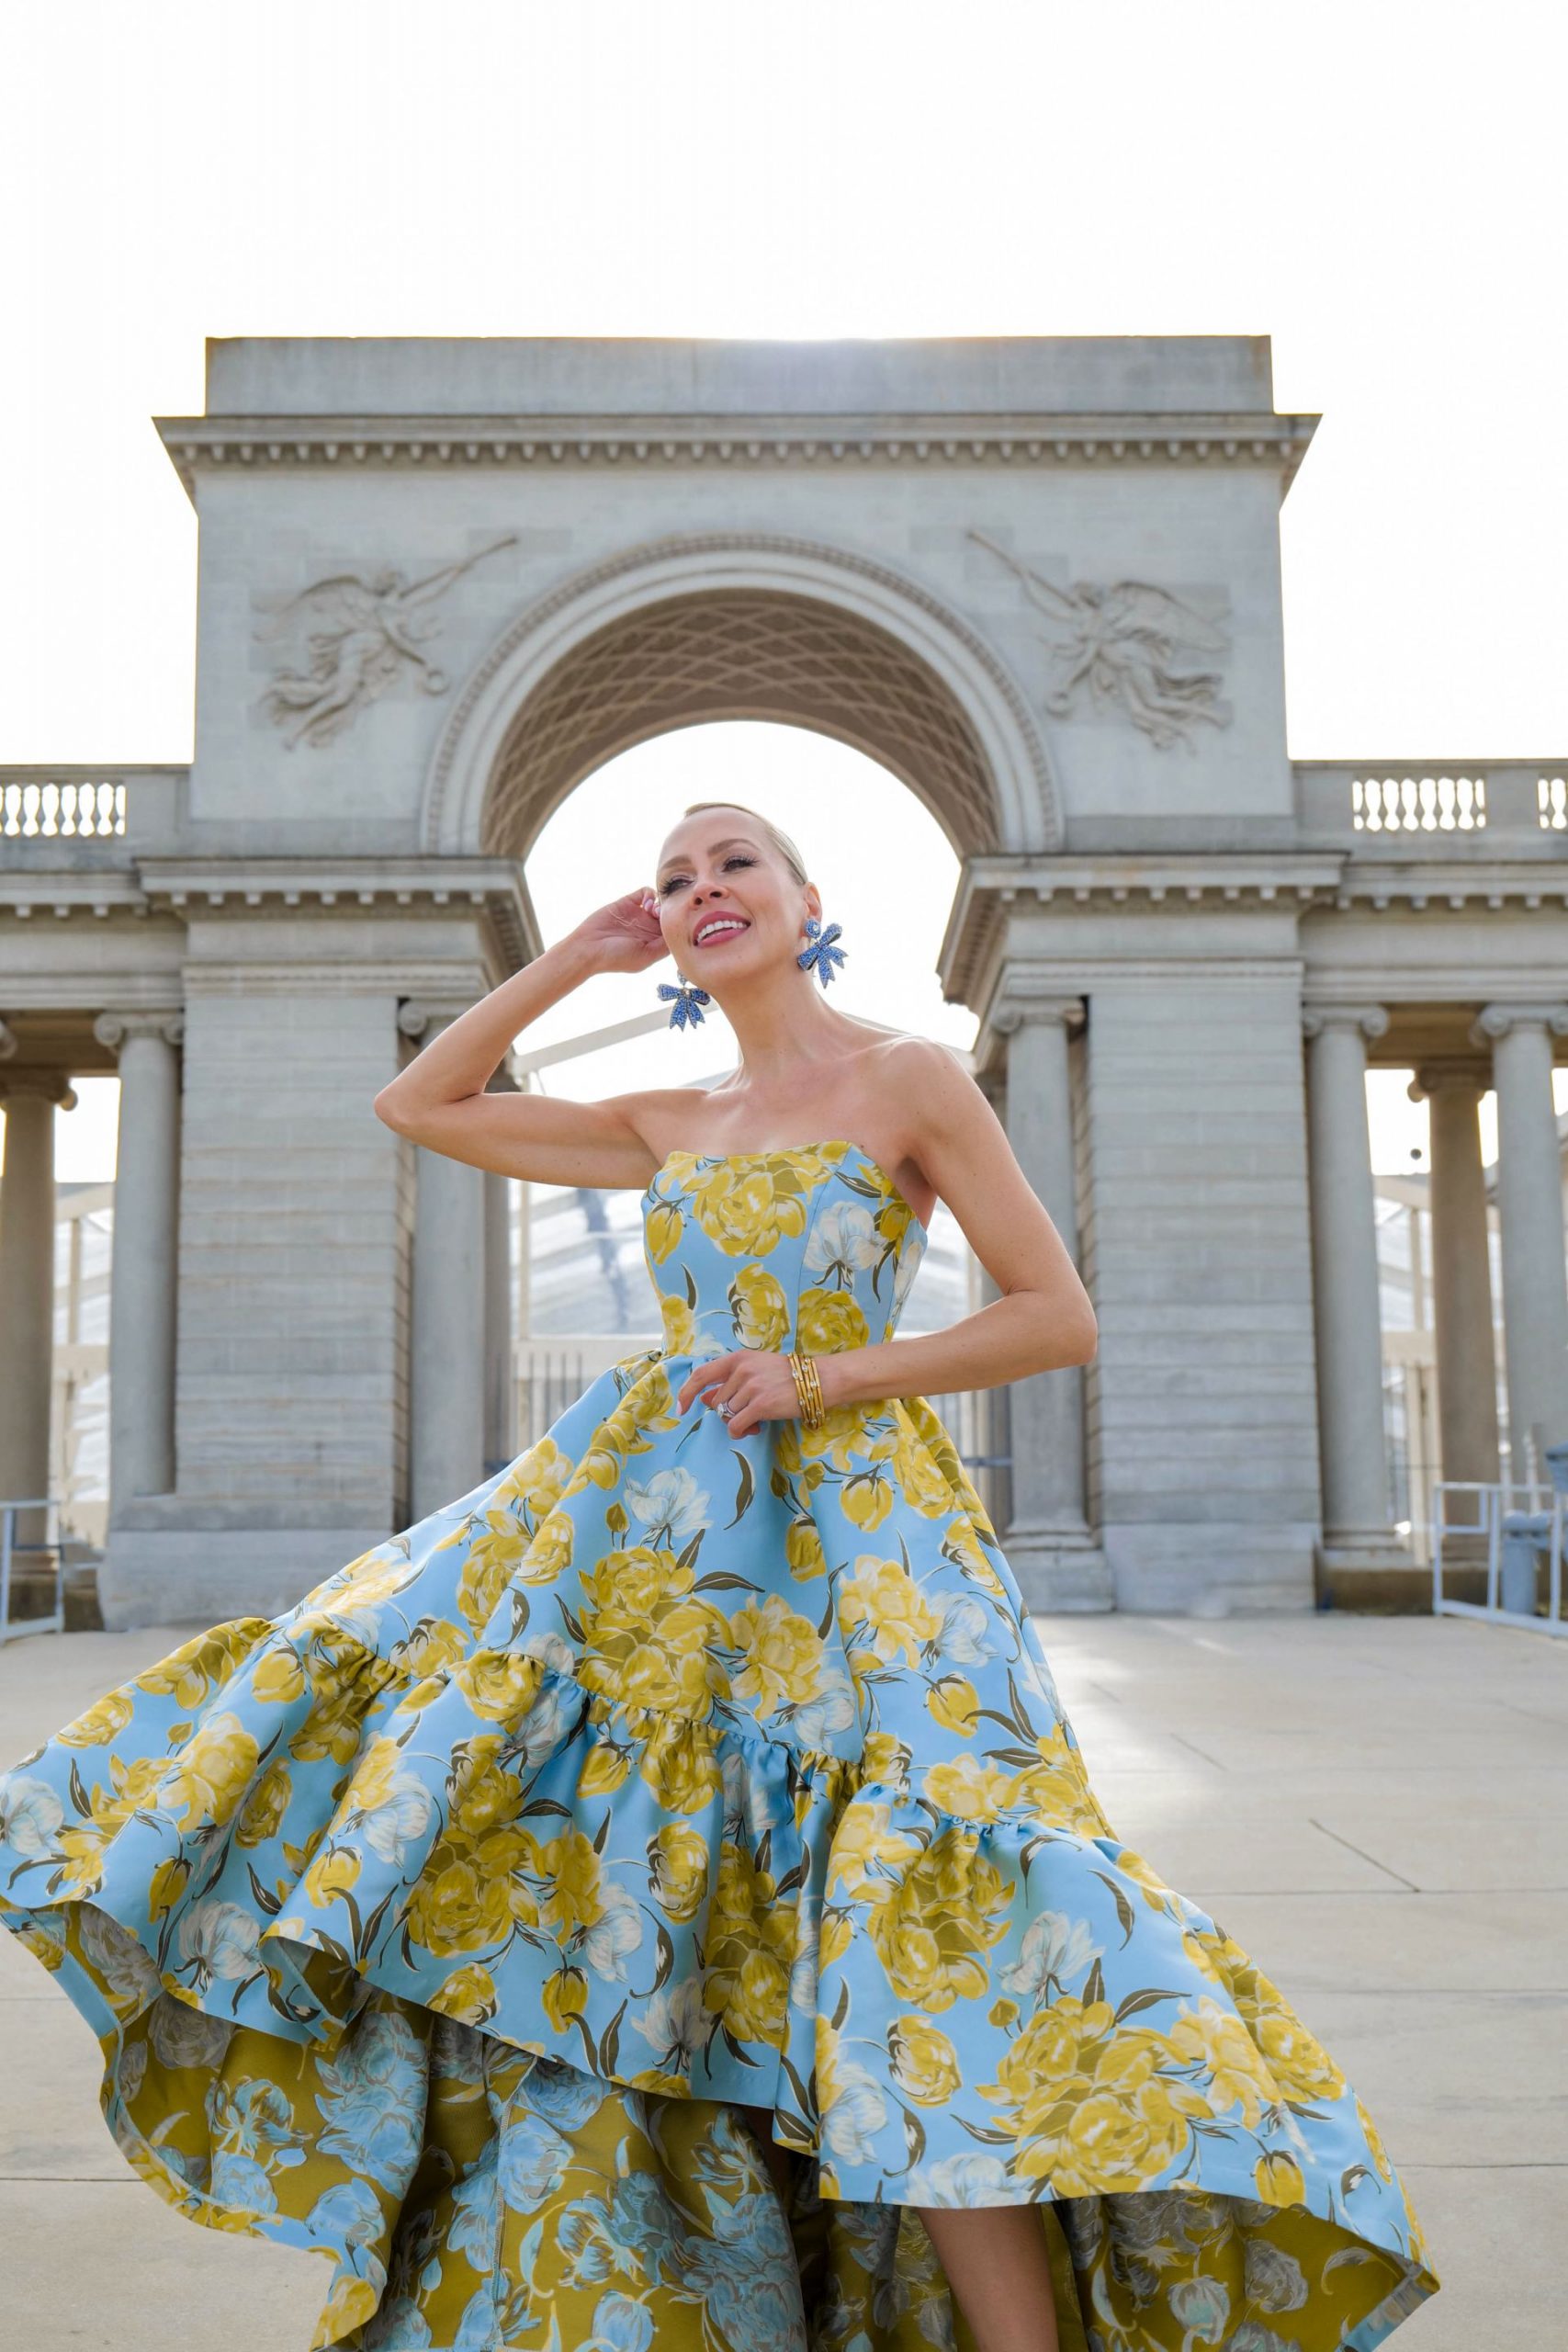 Spring collection from Mestiza NY, wedding guest dresses, floral print pajamas, statement earrings, chic high low midi dresses. Garden party. By Veronica Levy, Lombard & Fifth.